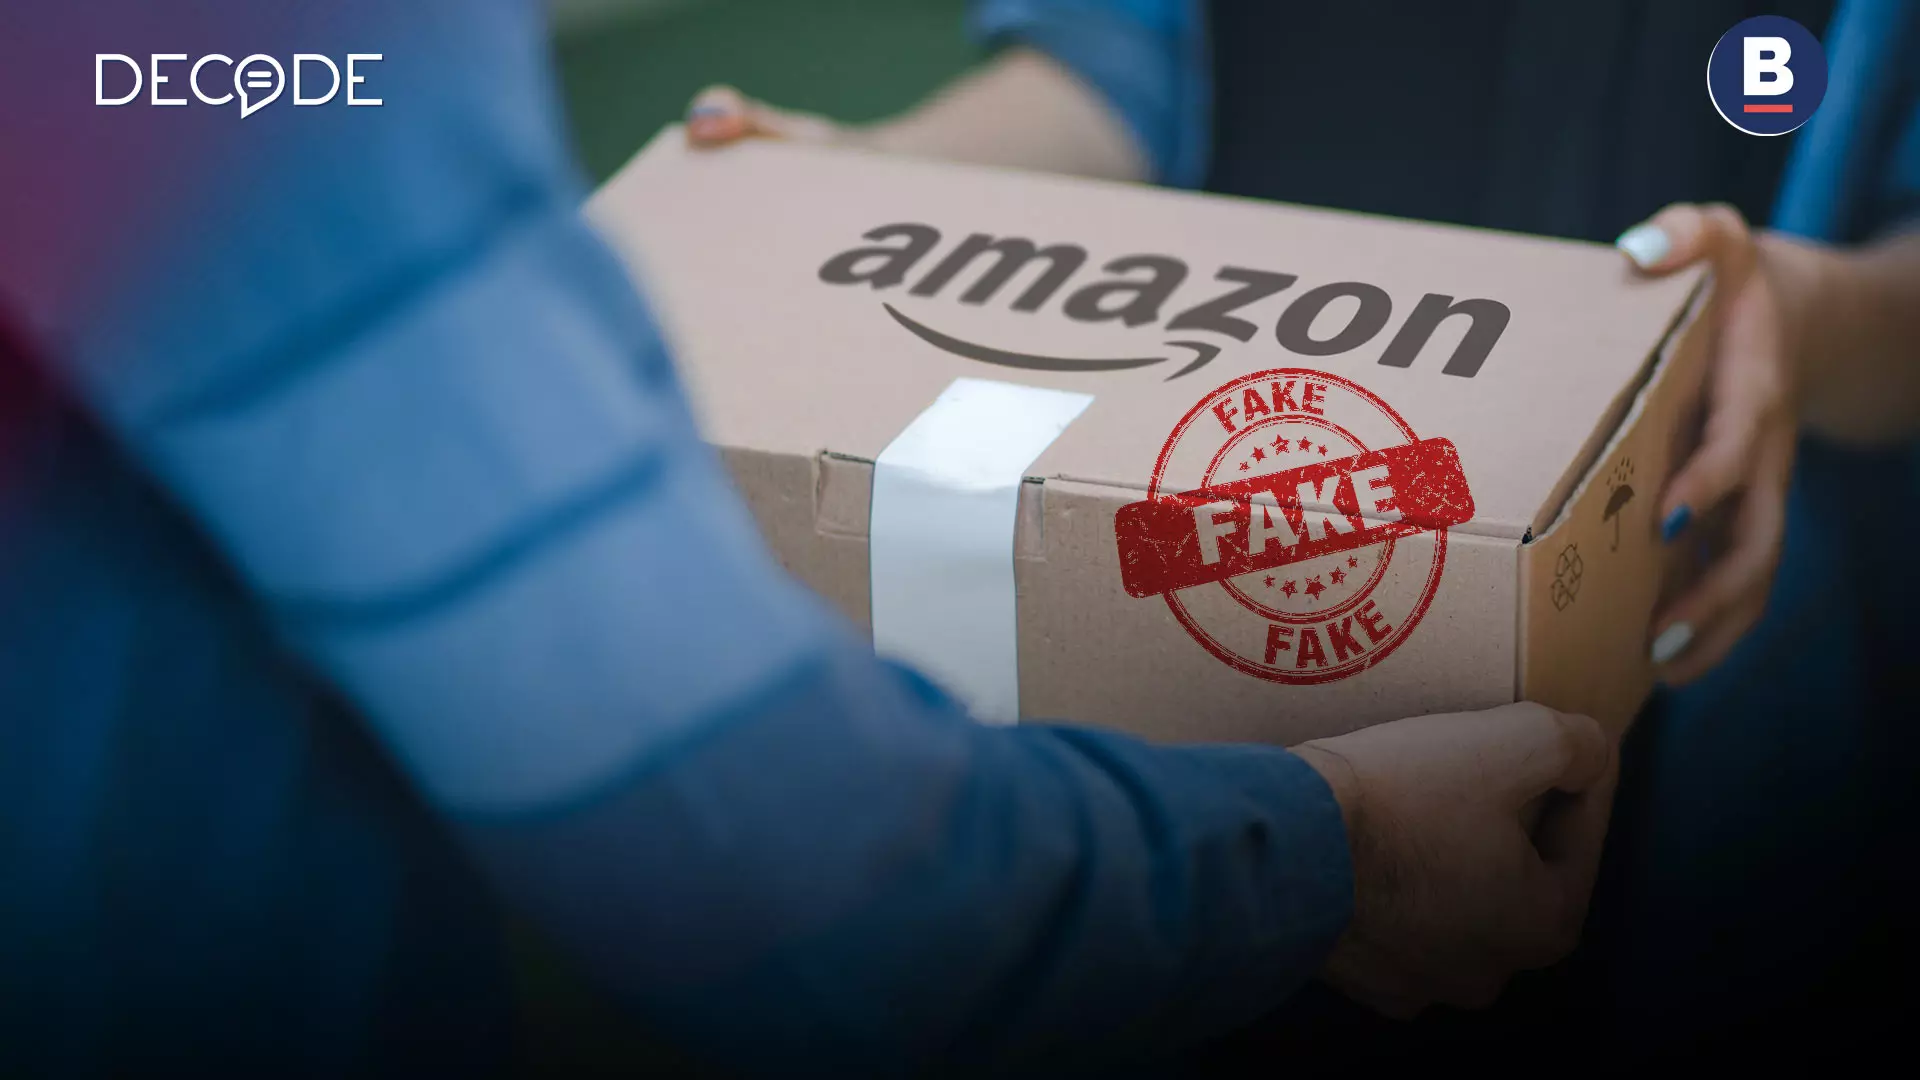 Fake Product Scare: Amazons Customers Demand Better Redressal